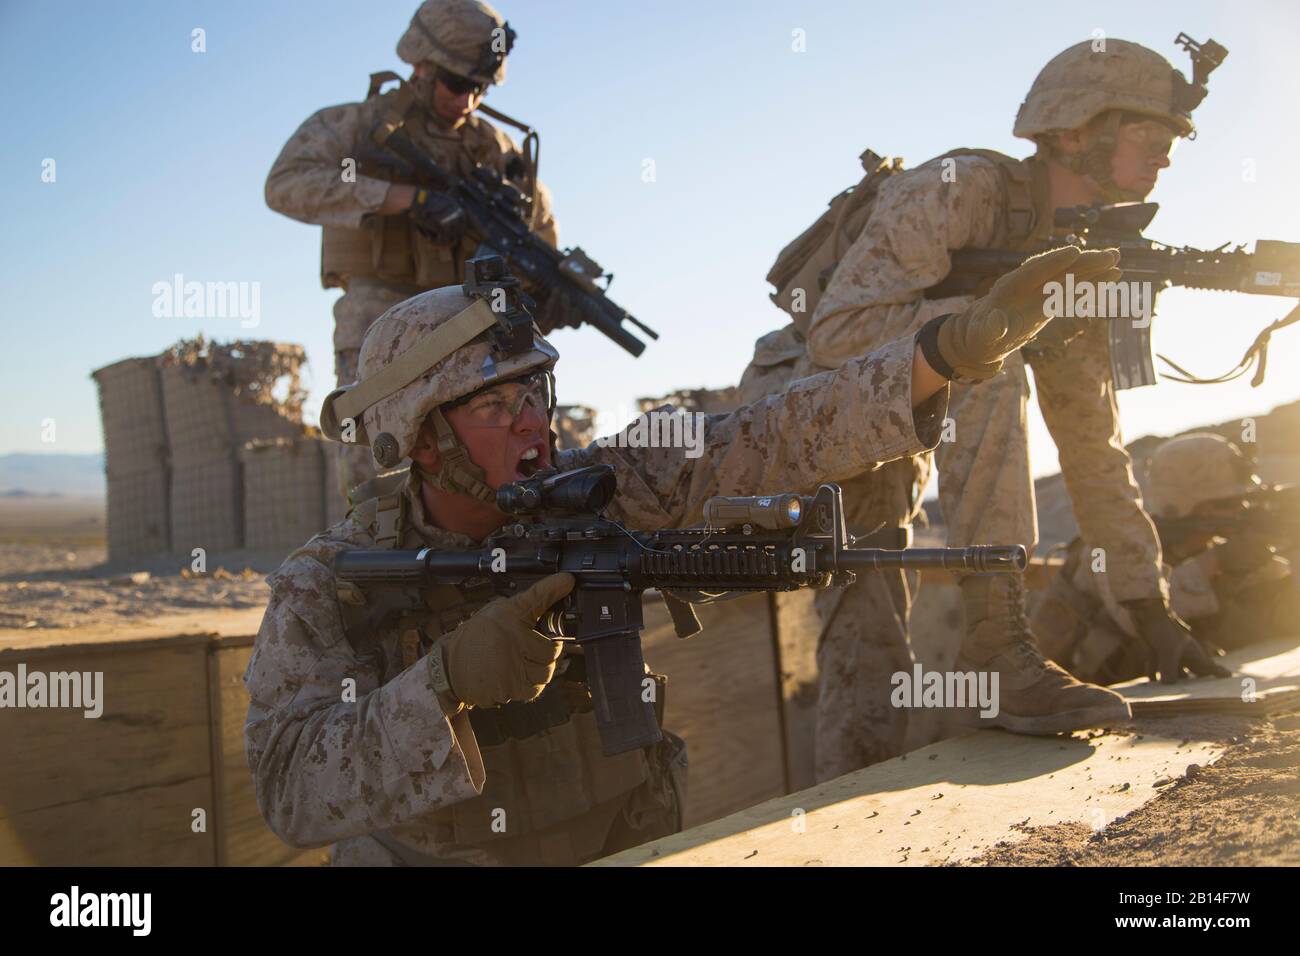 U.S. Marine Corps 1st Lt. Alex Gundy, bottom, the 3rd Platoon commander, Kilo Company, Battalion Landing Team, 3rd Battalion, 1st Marines, gives the order to take the last objective to his Marines during a simulated raid during 13th Marine Expeditionary Unit’s Realistic Urban Training at Twenty-Nine Palms, California, March 1, 2018. RUT is a multi-week training exercise designed to prepare deploying units for real world combat and scenarios. (U.S. Marine Corps photo by Lance Cpl. A. J. Van Fredenberg) Stock Photo